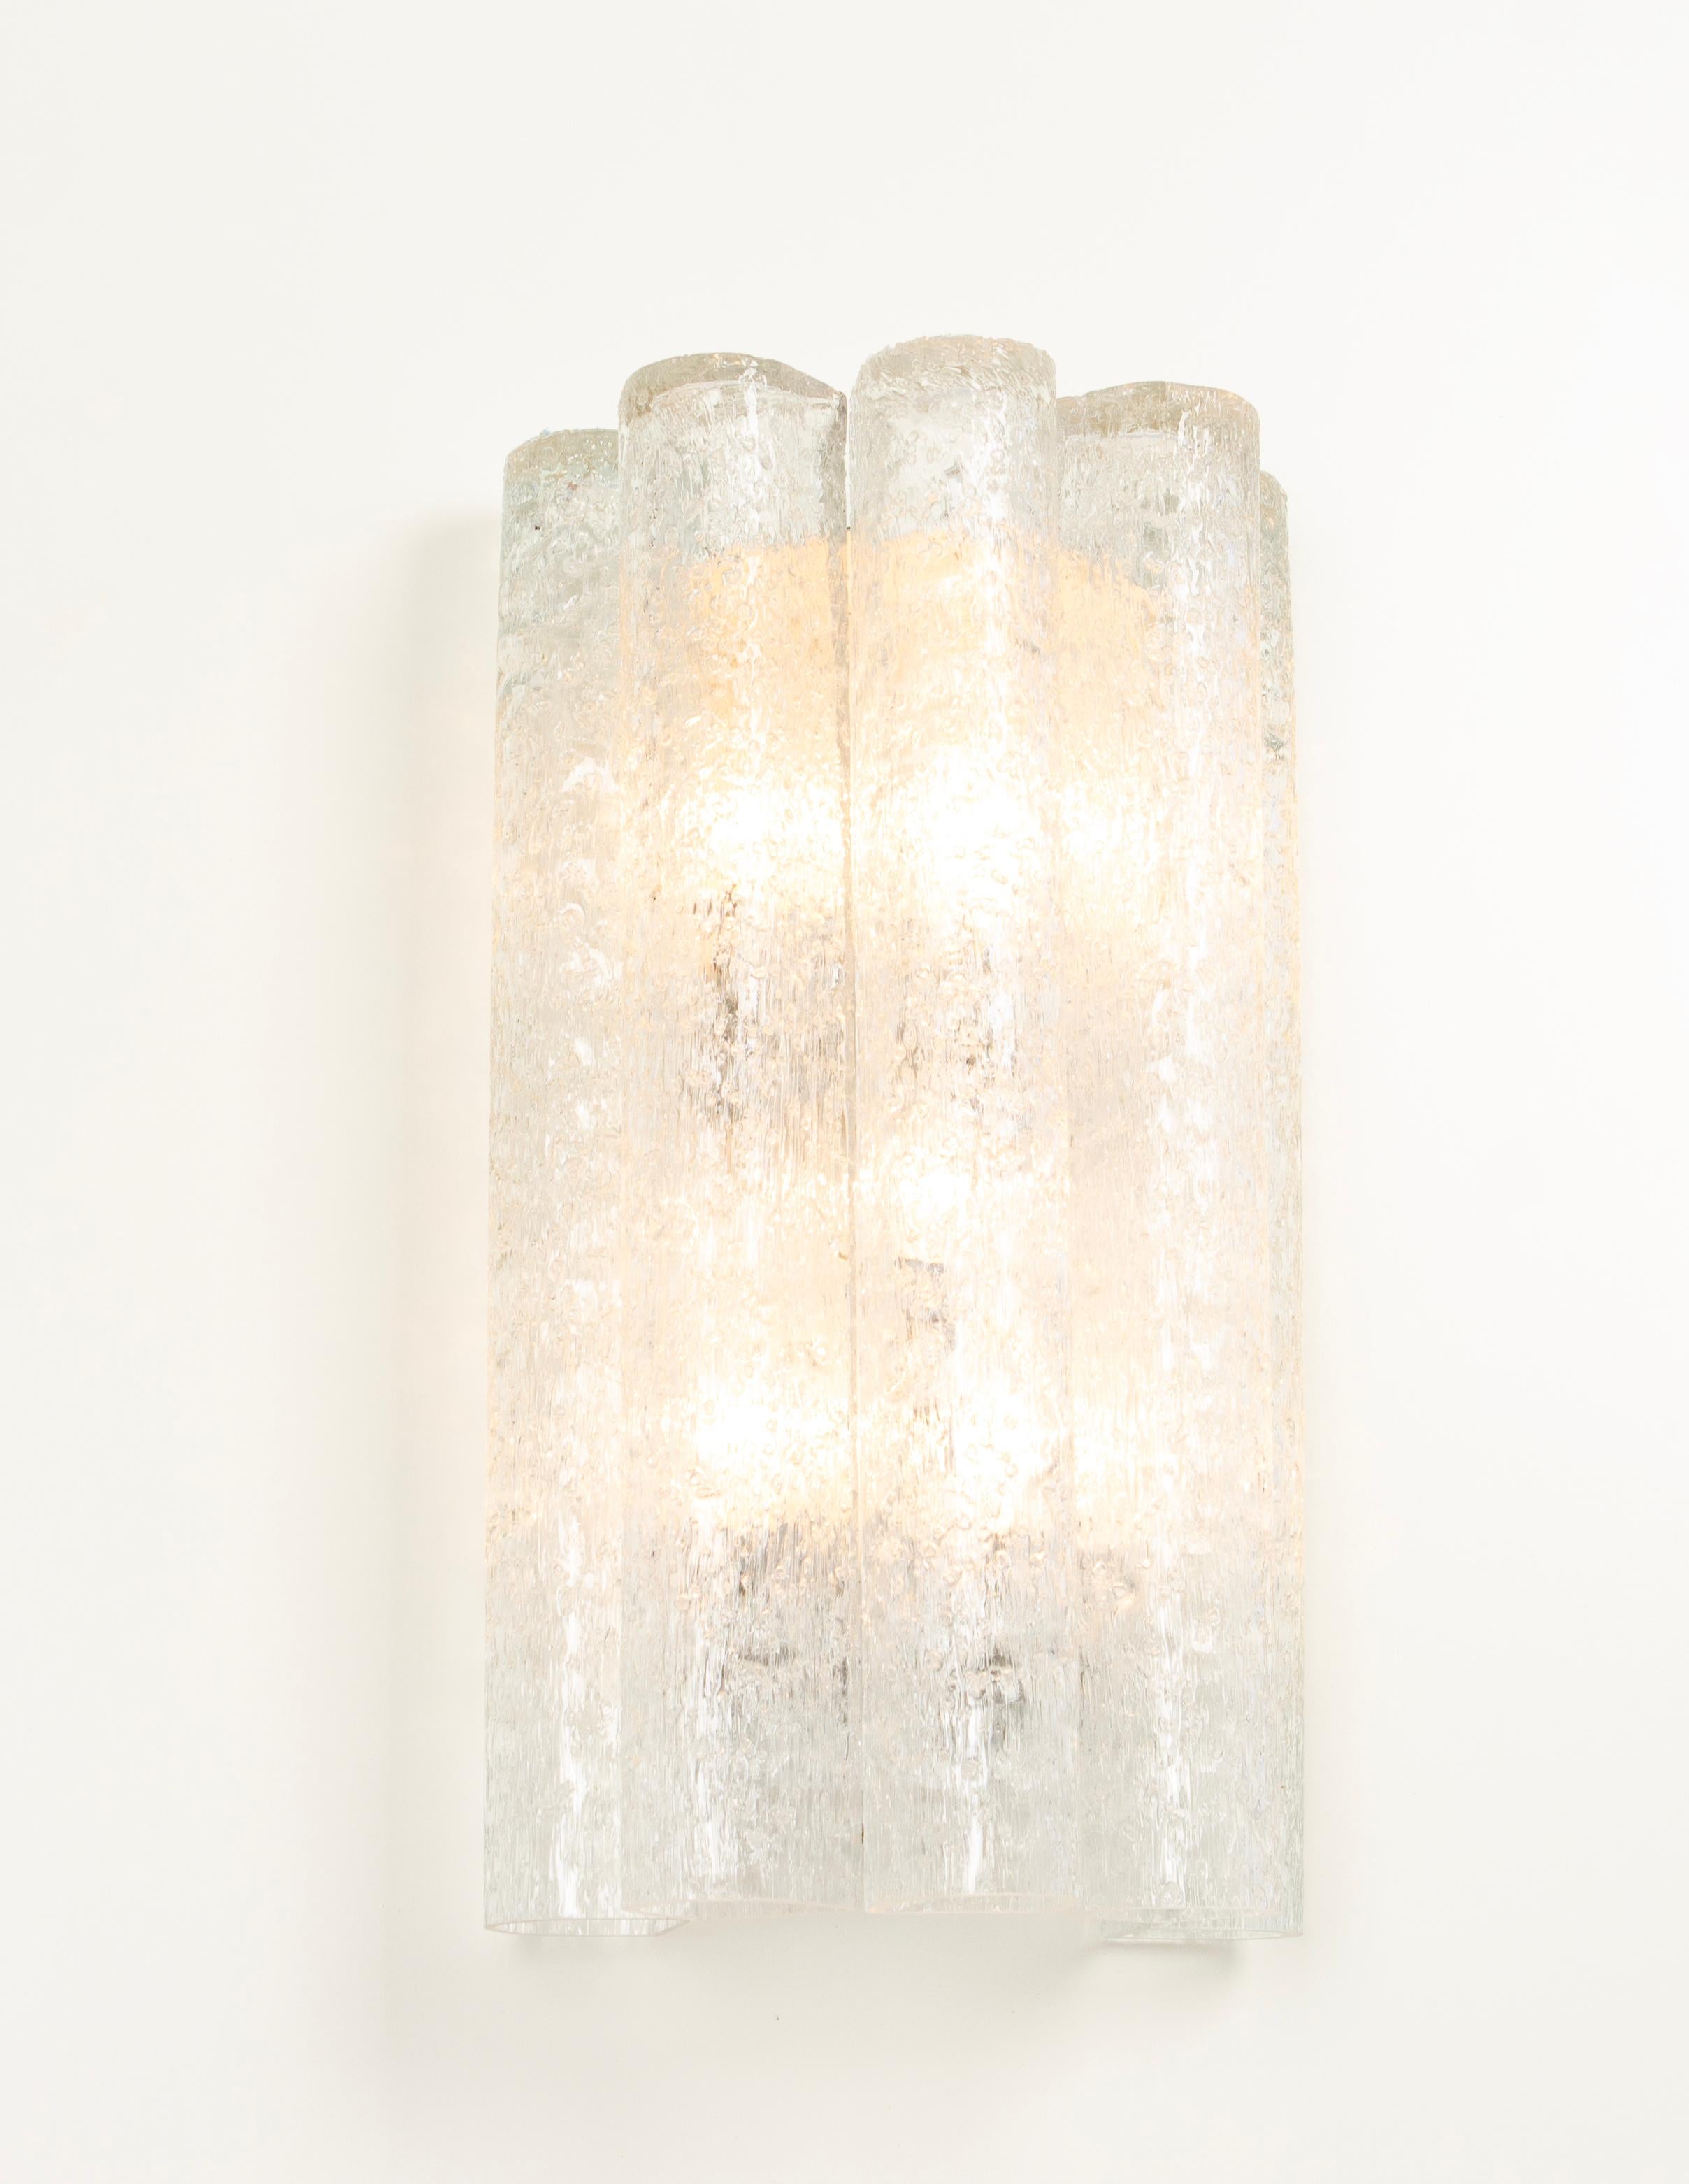 1 of 8 Sets /Large Pair of murano Glass Wall Sconces by Doria, Germany, 1960s For Sale 1